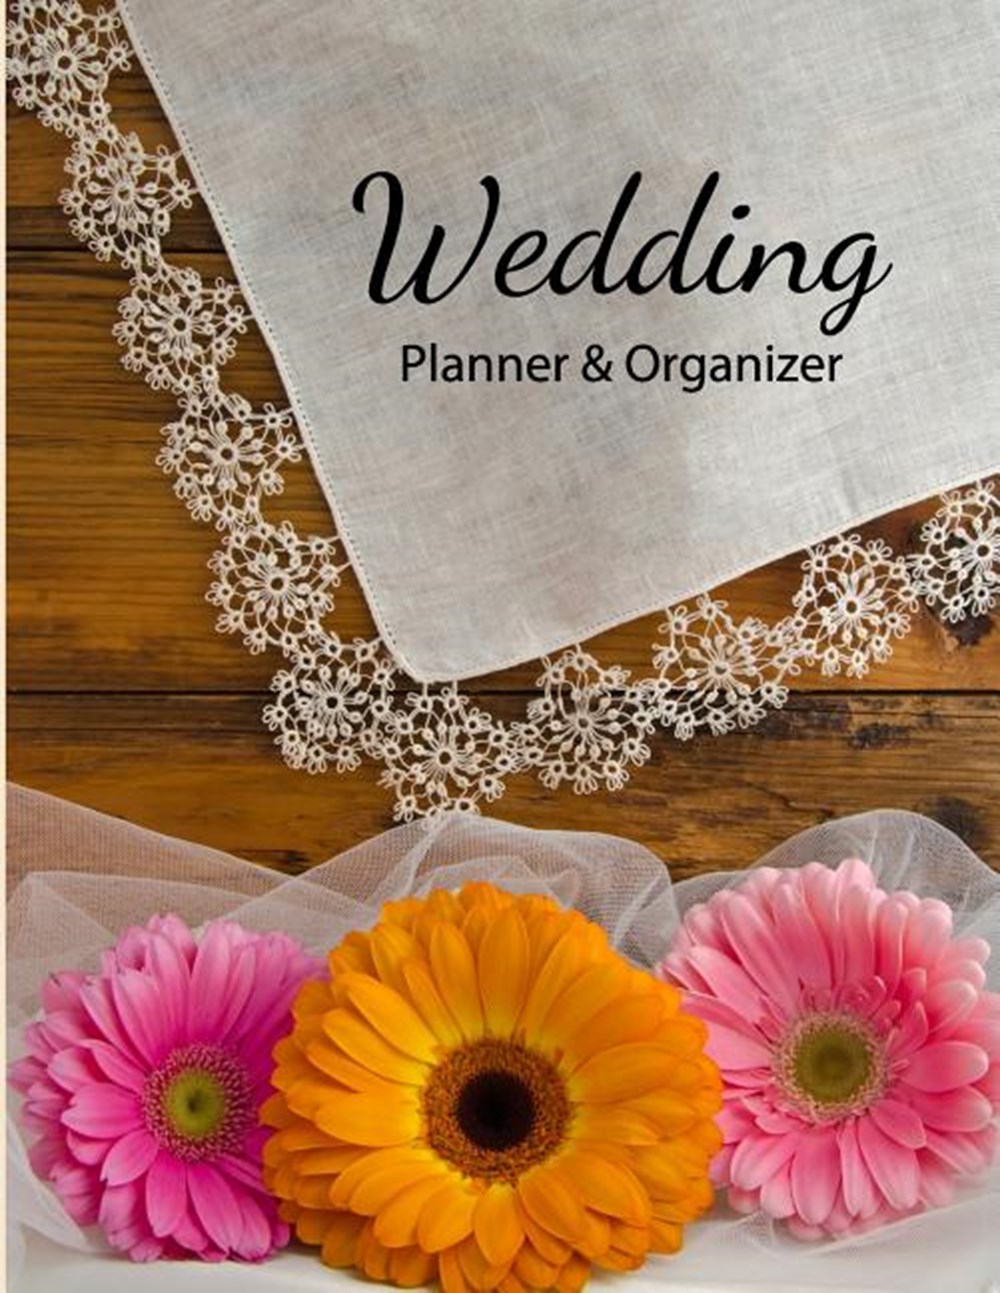 Wedding Planner & Organizer Easy to use checklists, worksheets, charts and tools - Black Bow Tie and